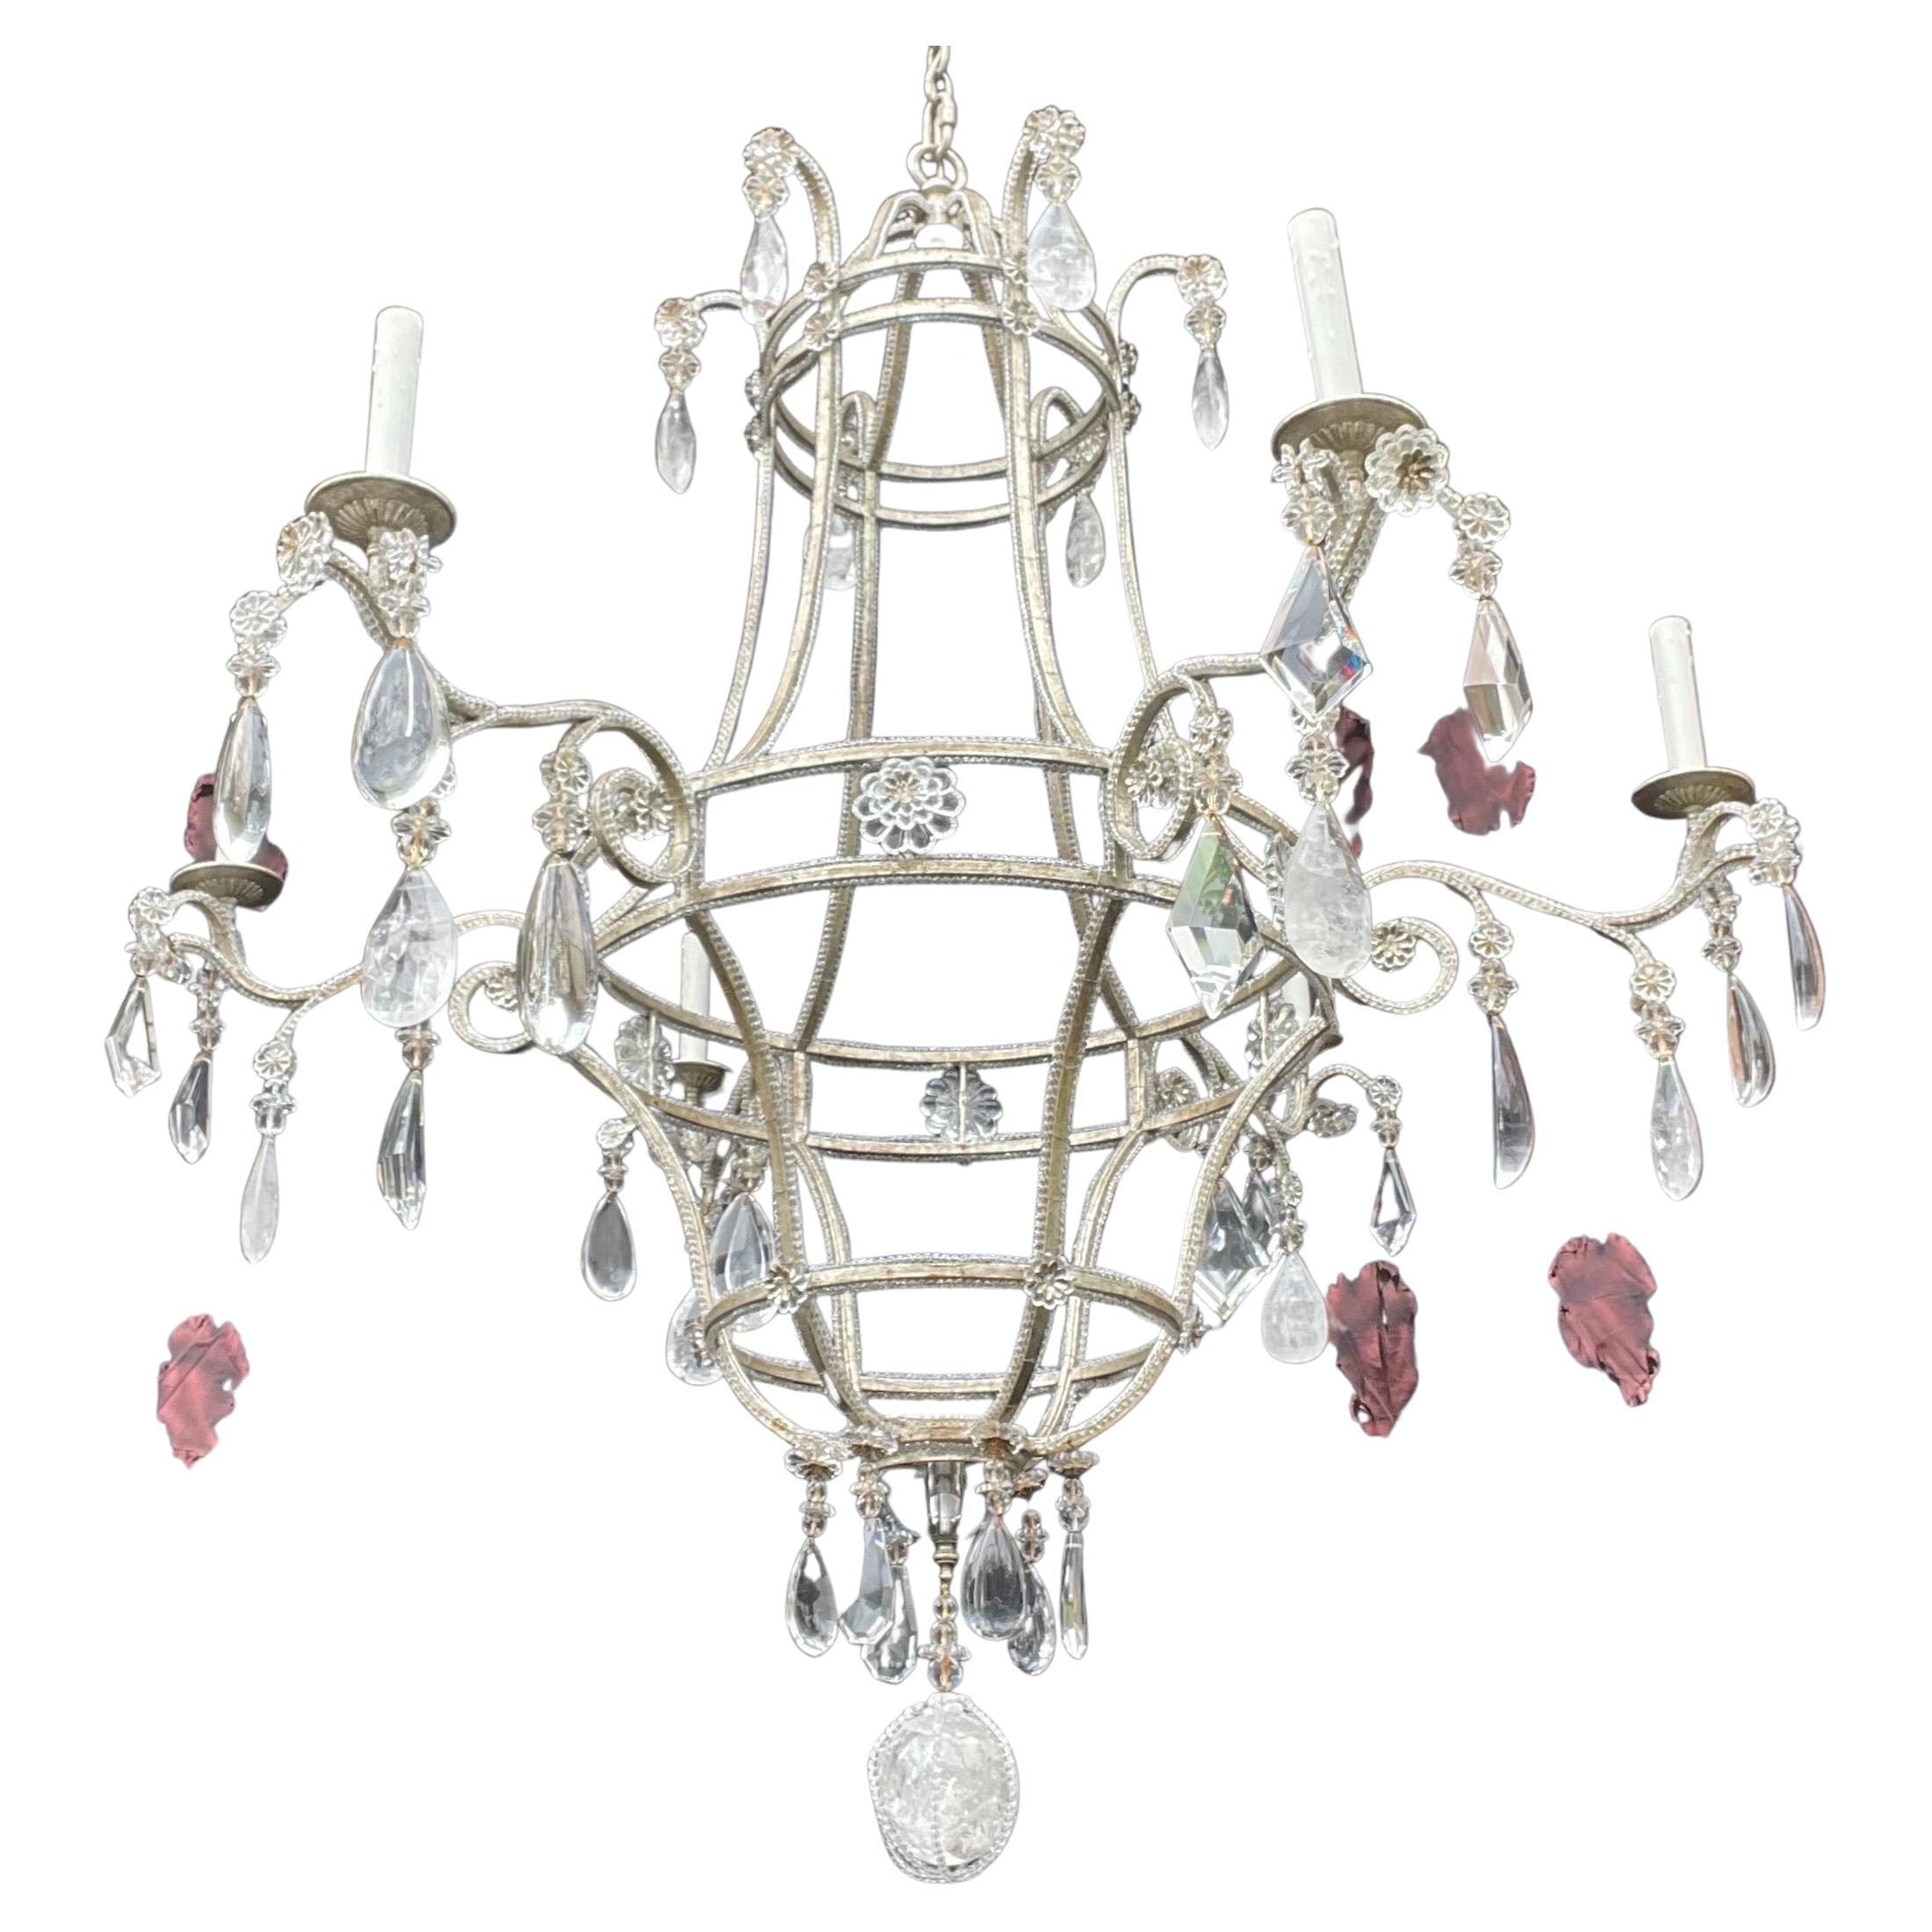 A Wonderful Modern Silver Leaf And Beaded Open Bird Cage Frame With Rock Crystal & Alternating Crystal Drops In The Manner Of Maison Baguès, Very Large Chandelier Has 6 Candelabra Sockets And Comes With Chain And Canopy.
Actual Fixture Measures 50